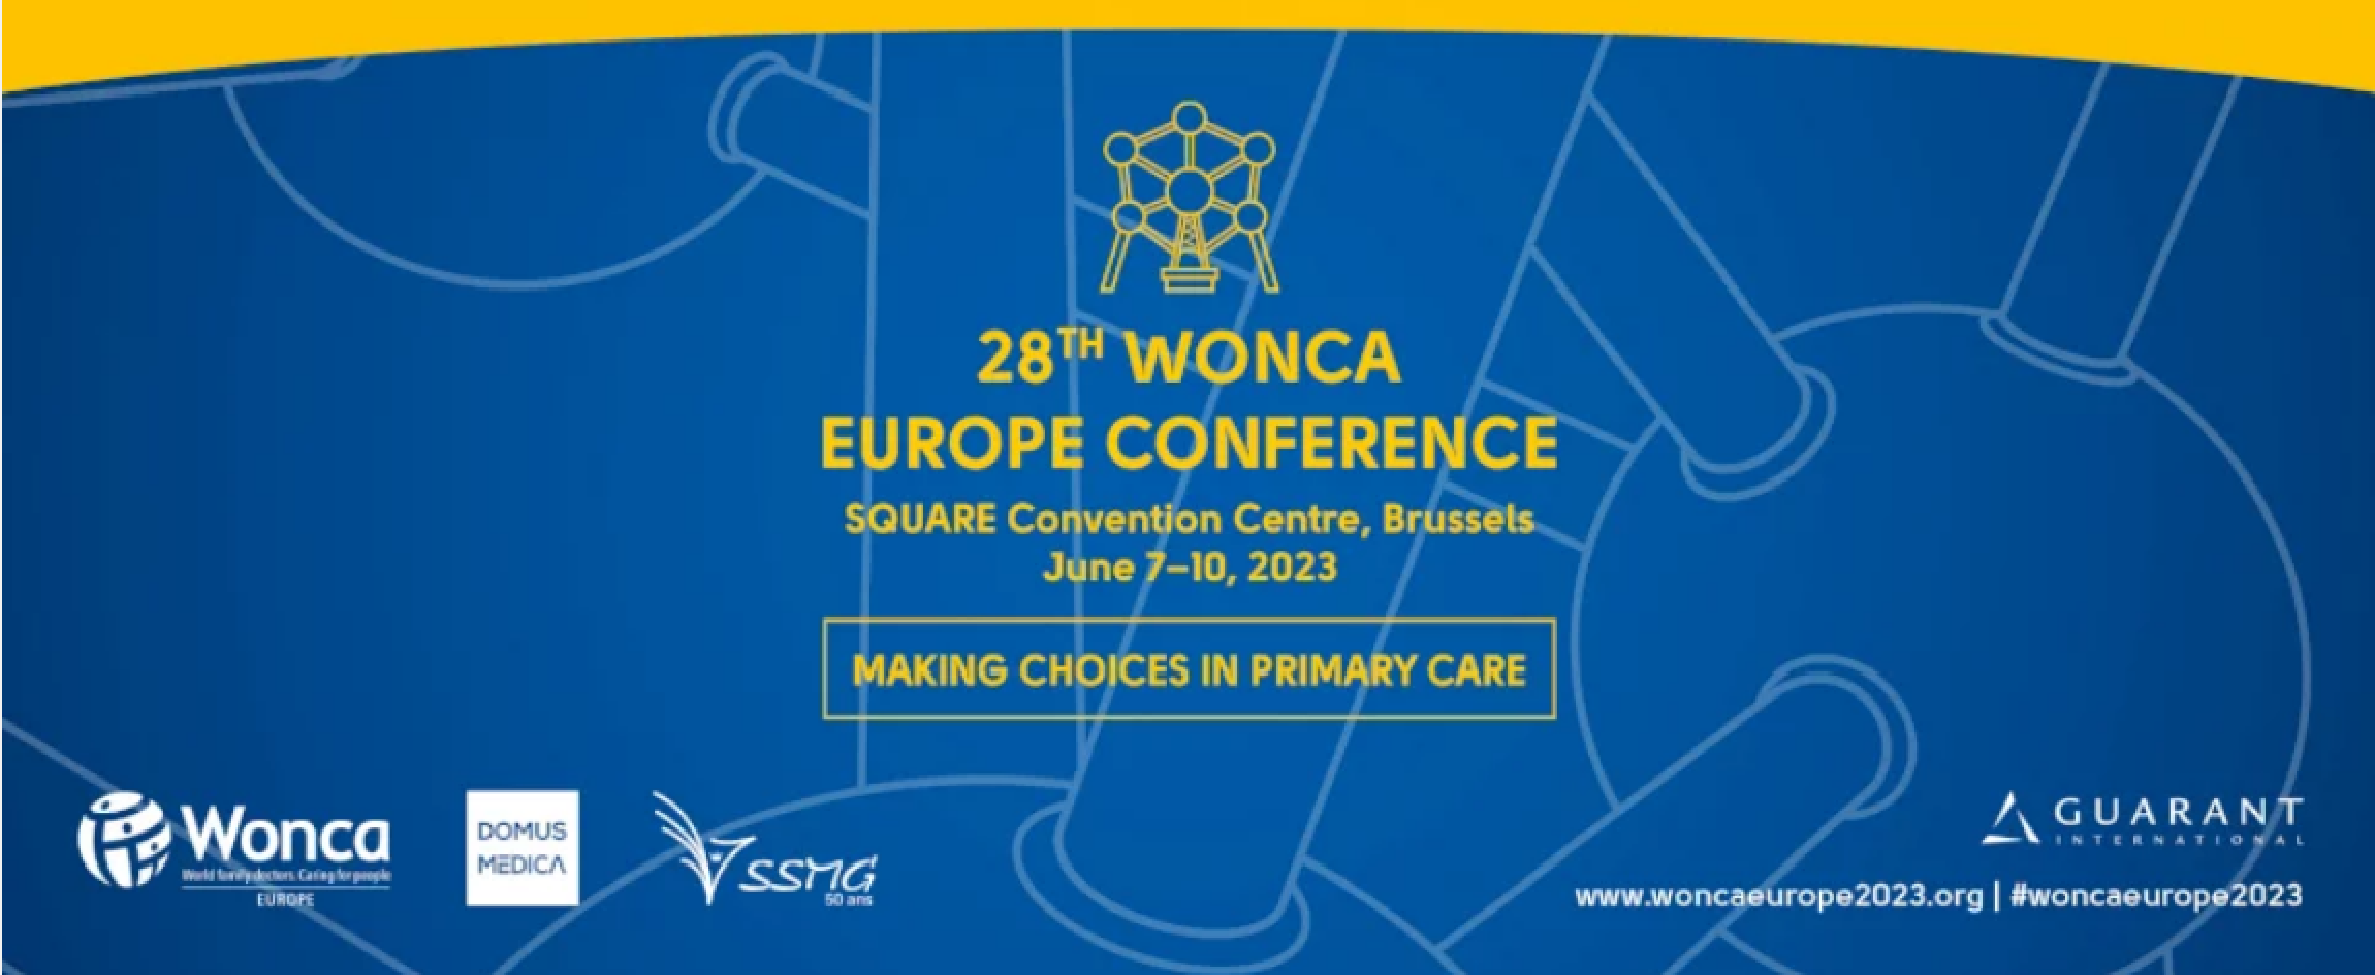 28th WONCA Europe Conference 2023